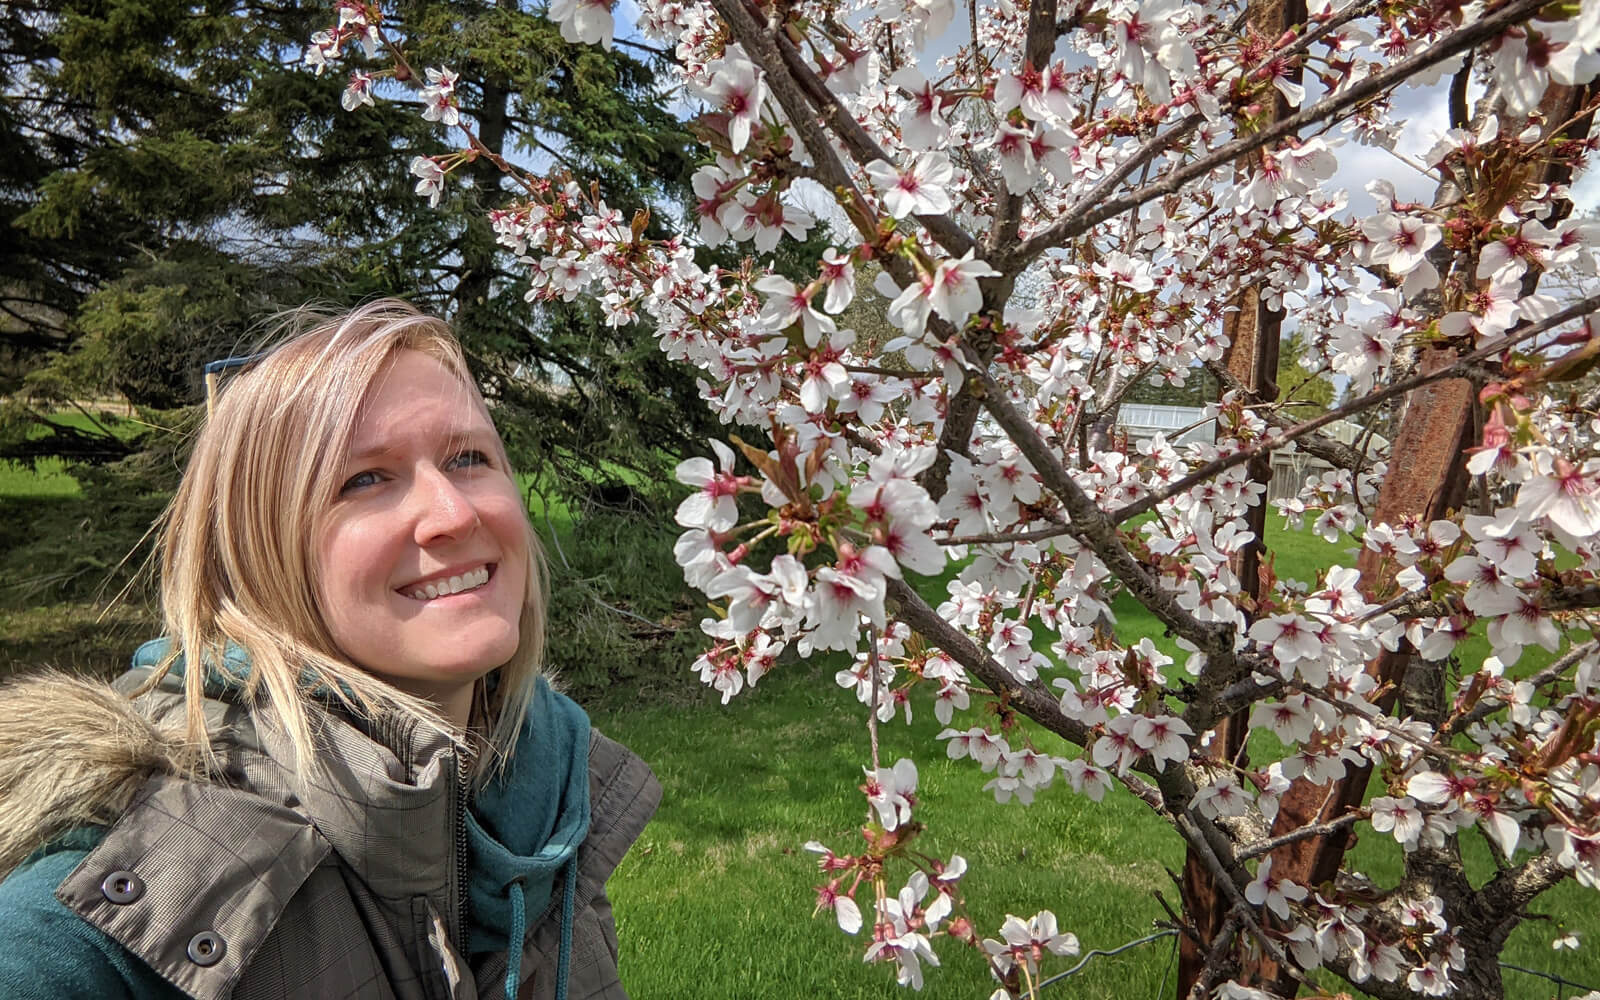 Lindsay with Cherry Blossoms in Niagara